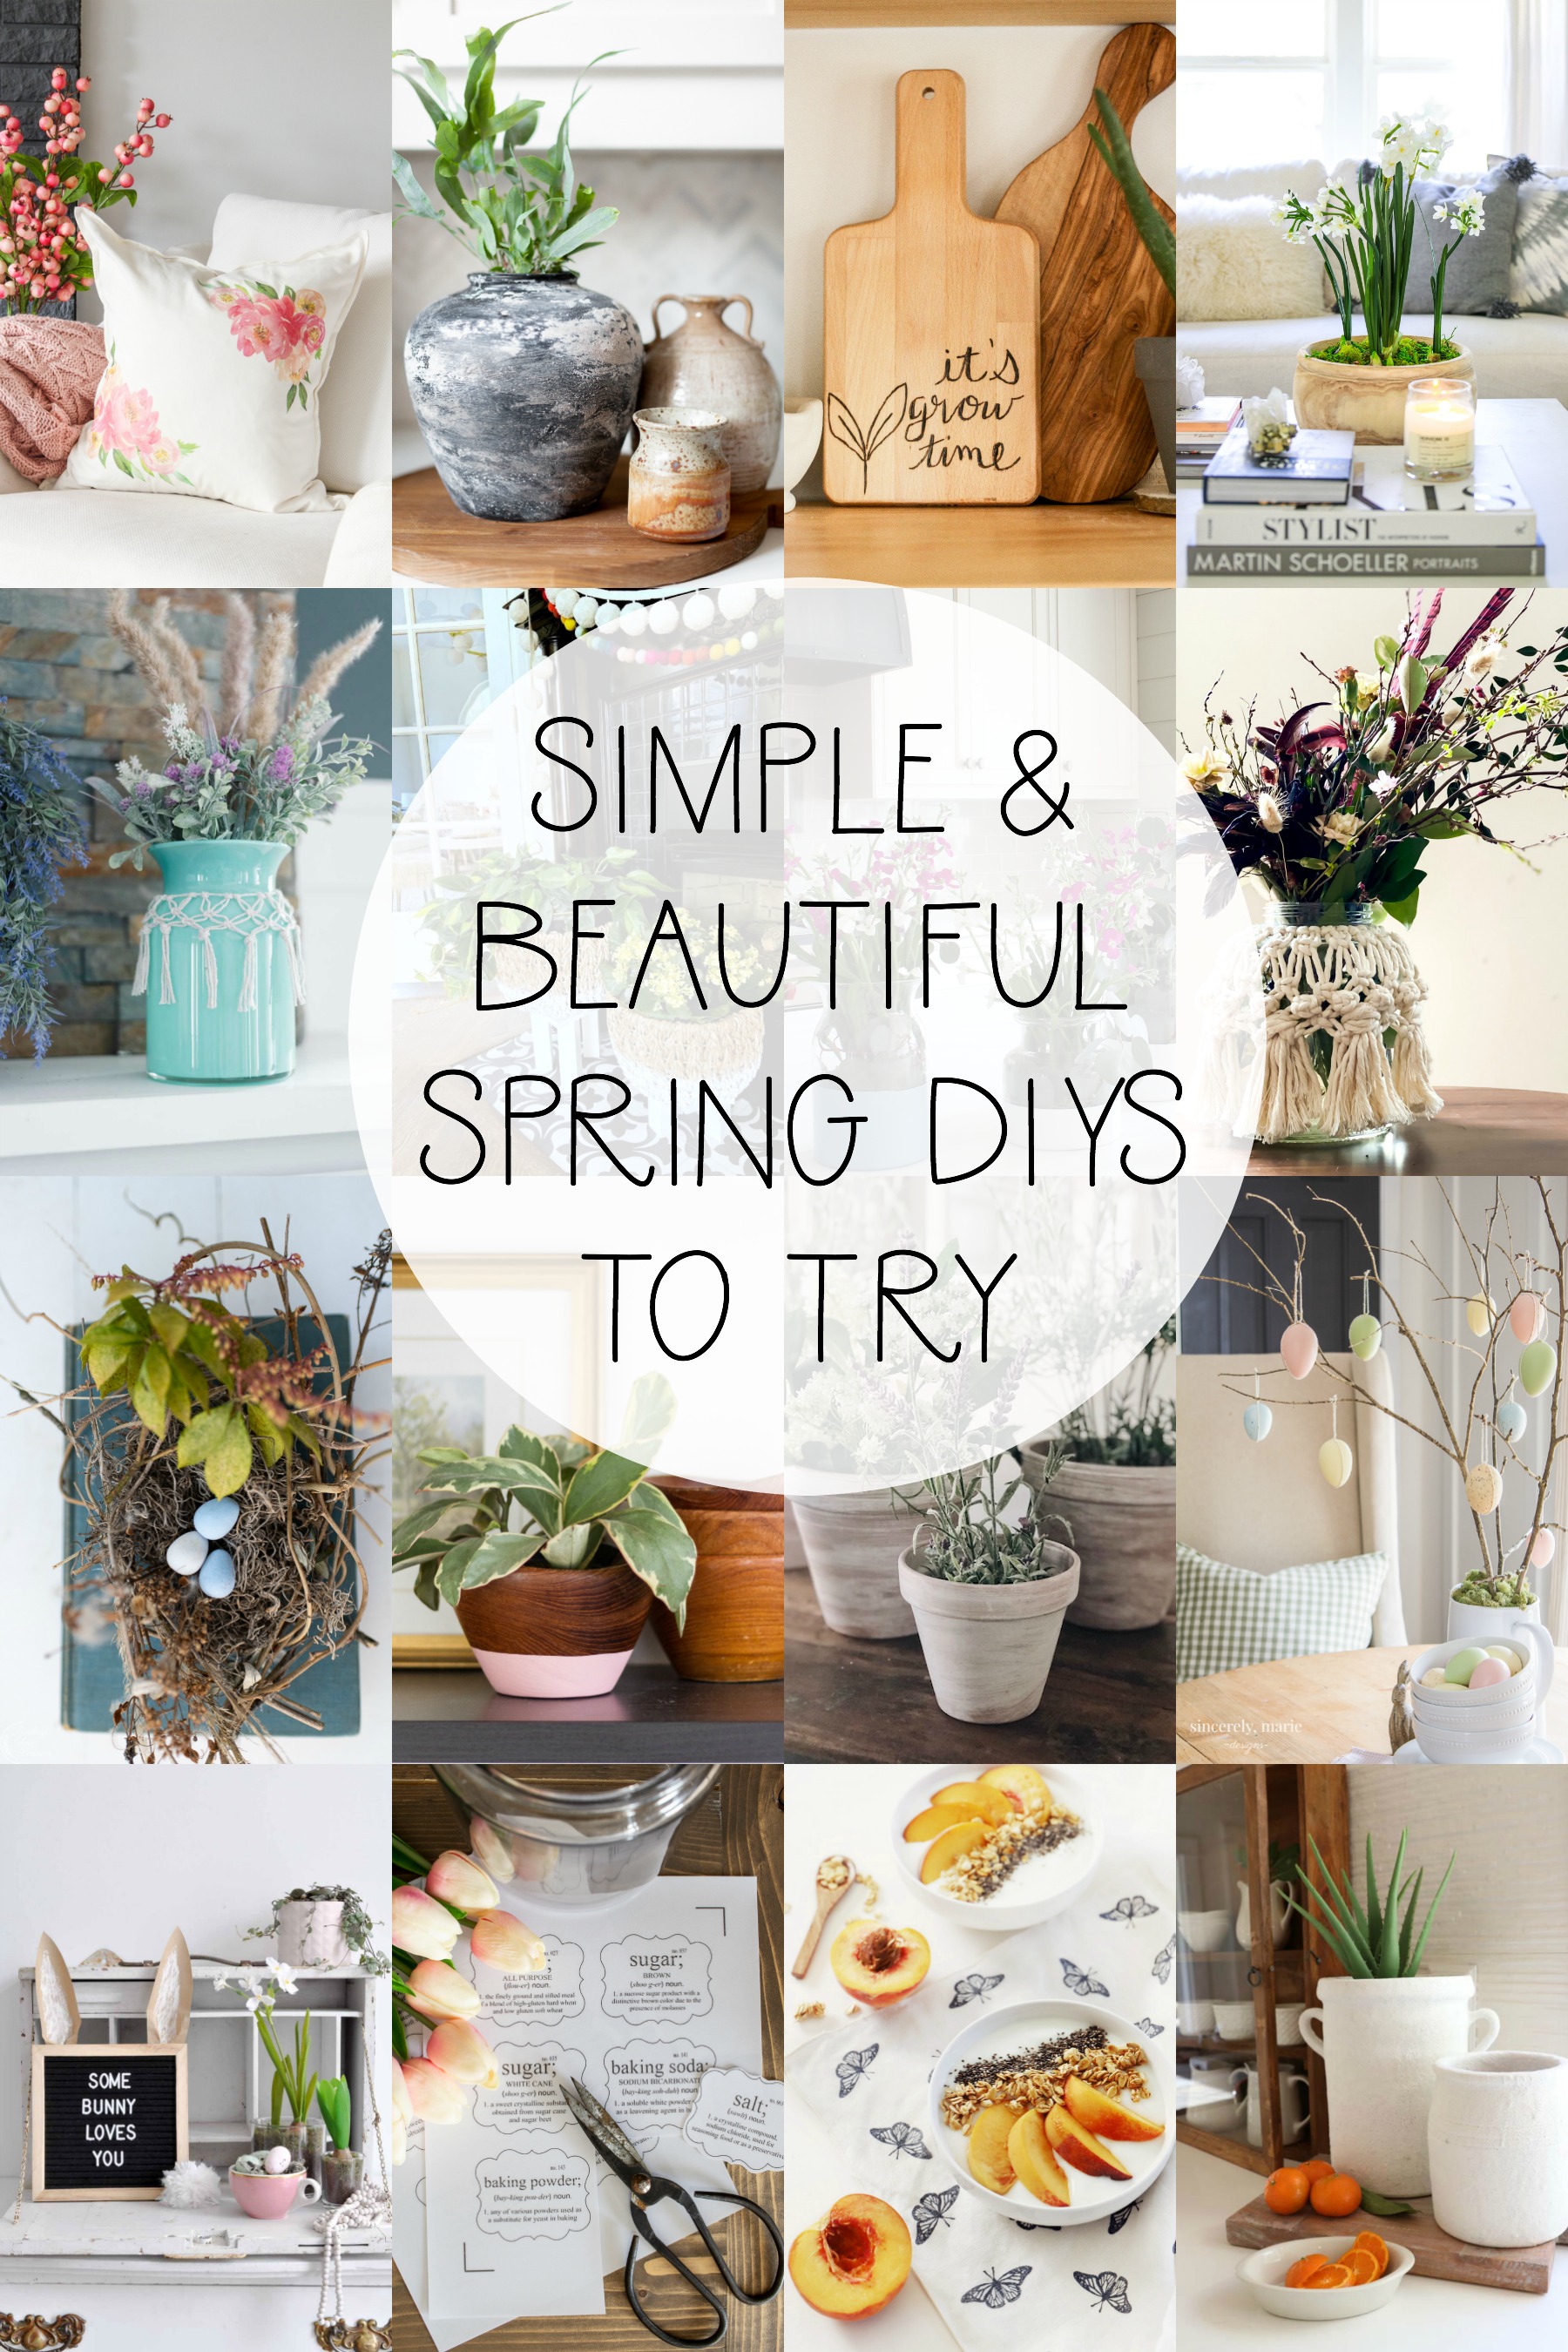 Simple and Beautiful Spring DIYS To Try poster.